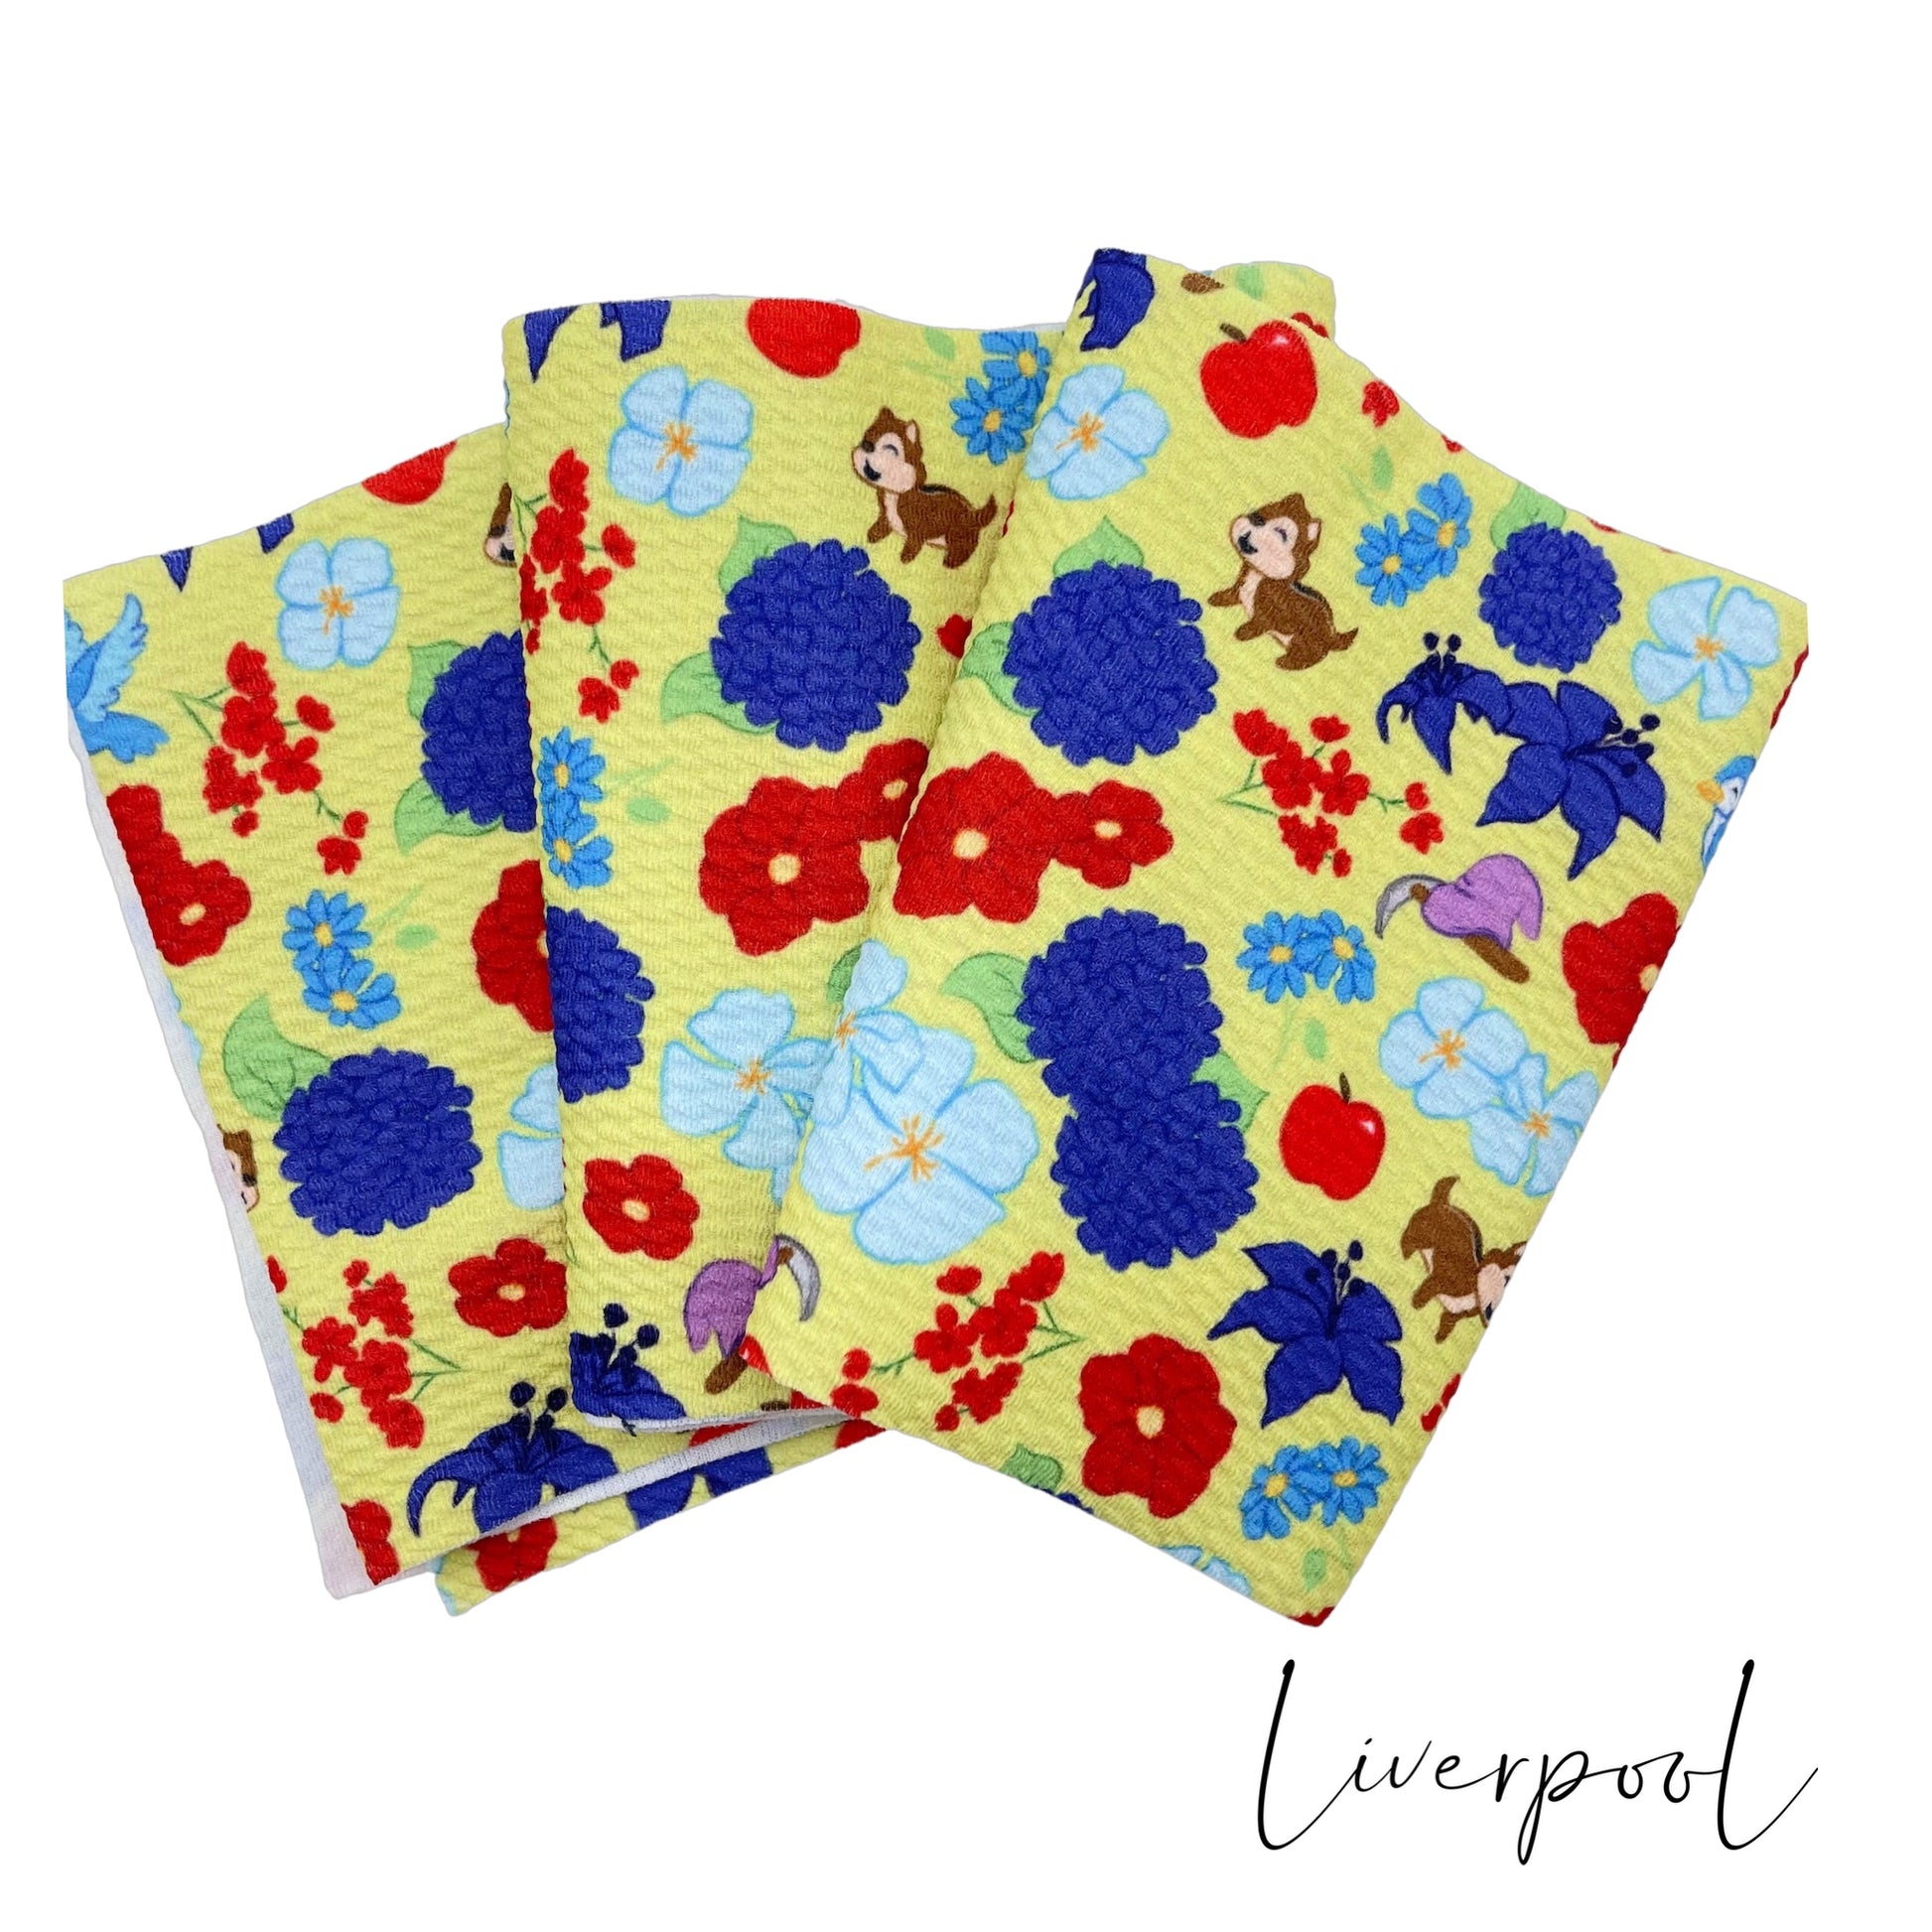 Folded yellow Liverpool stretch fabric strip with royal, red, and light blue floral princess pattern including chipmunks, hat and axe, apple, and blue bird.